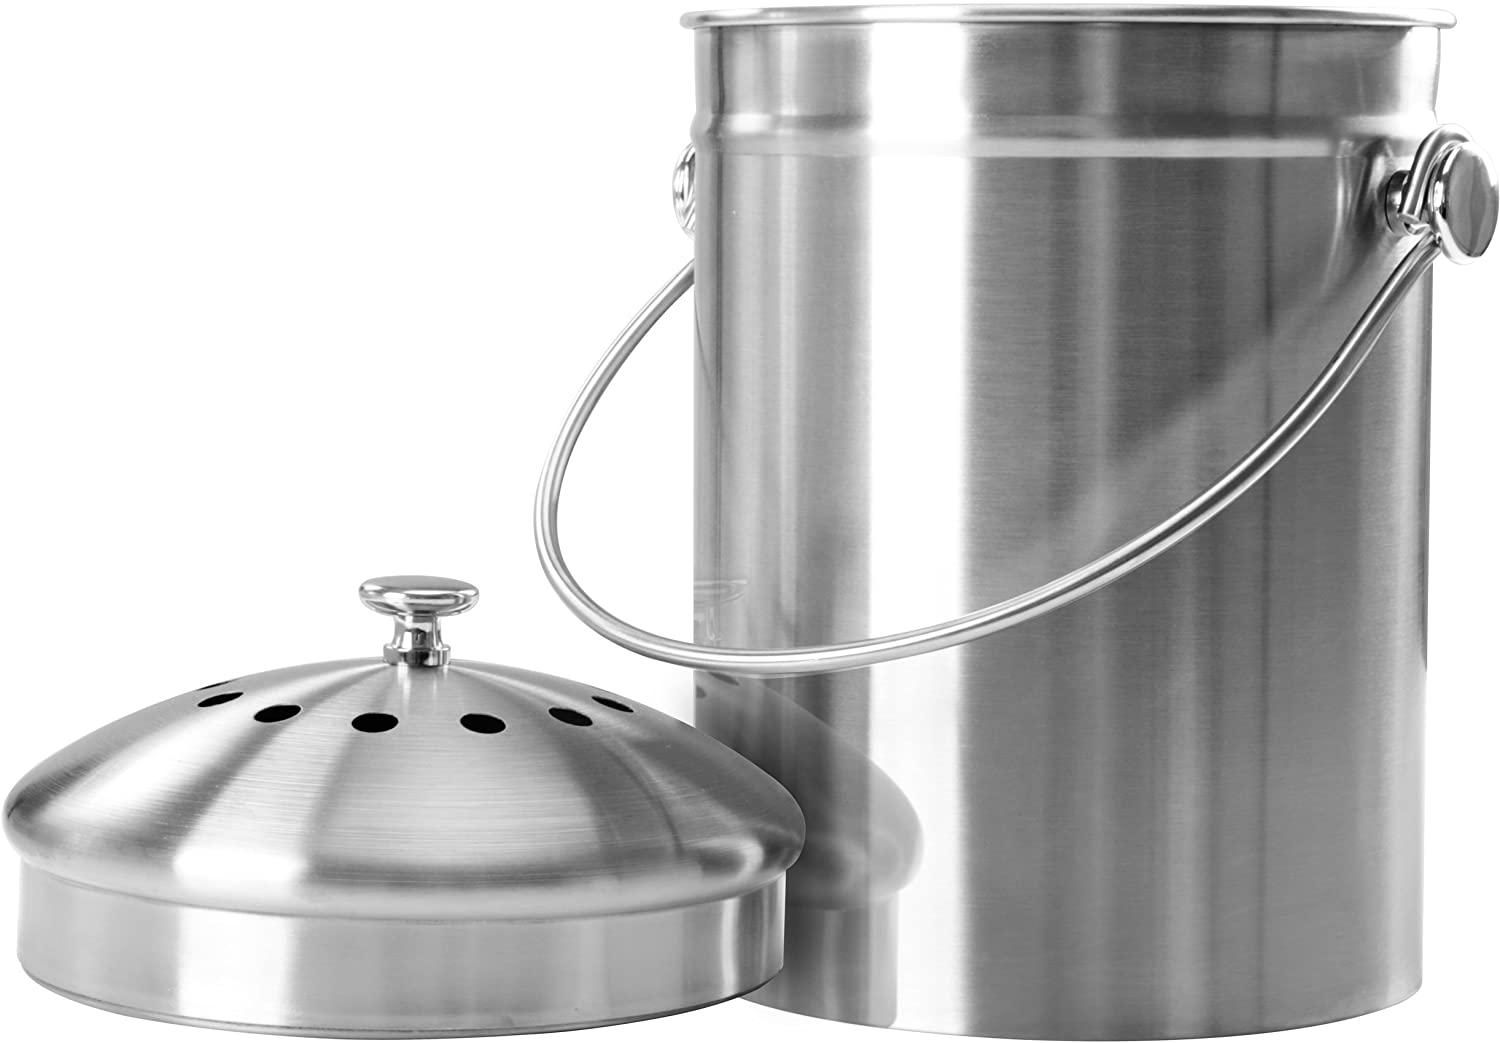 Compost Caddy Stainless Steel